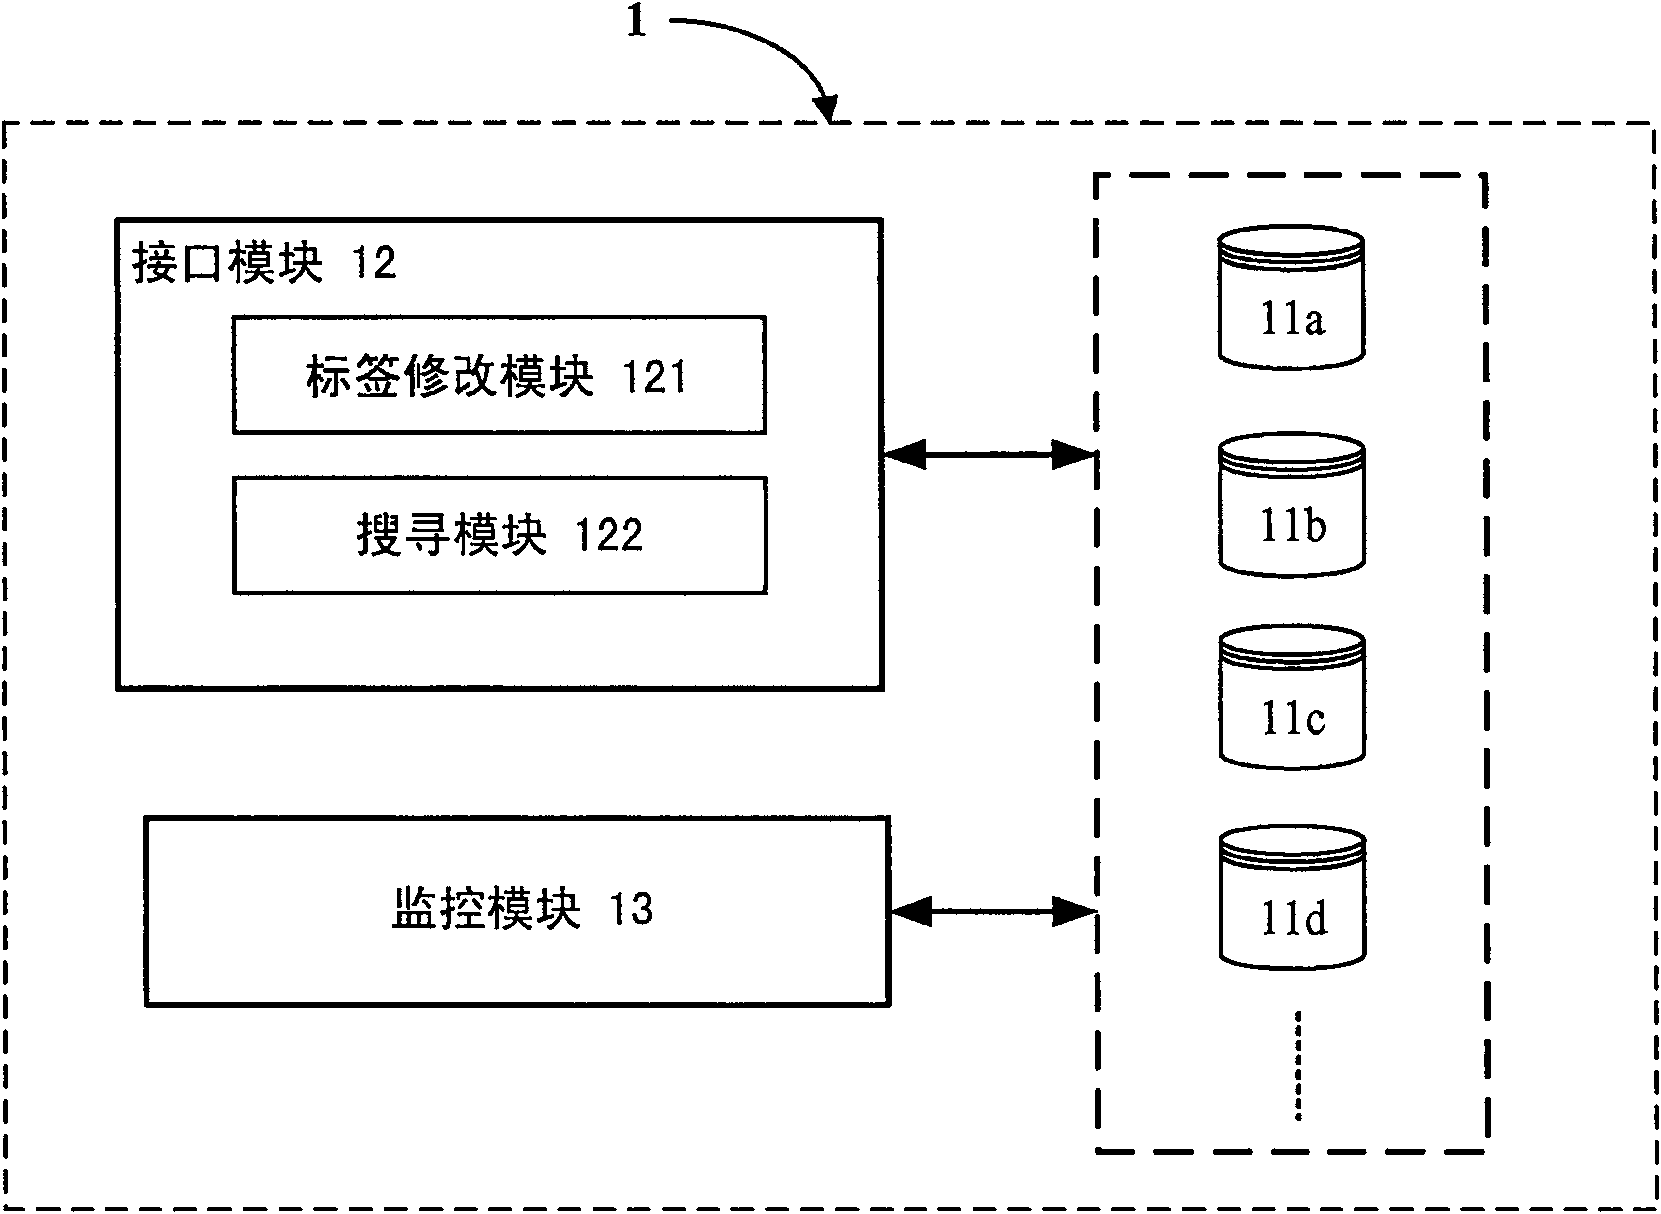 File tag system and method for searching and managing file tag